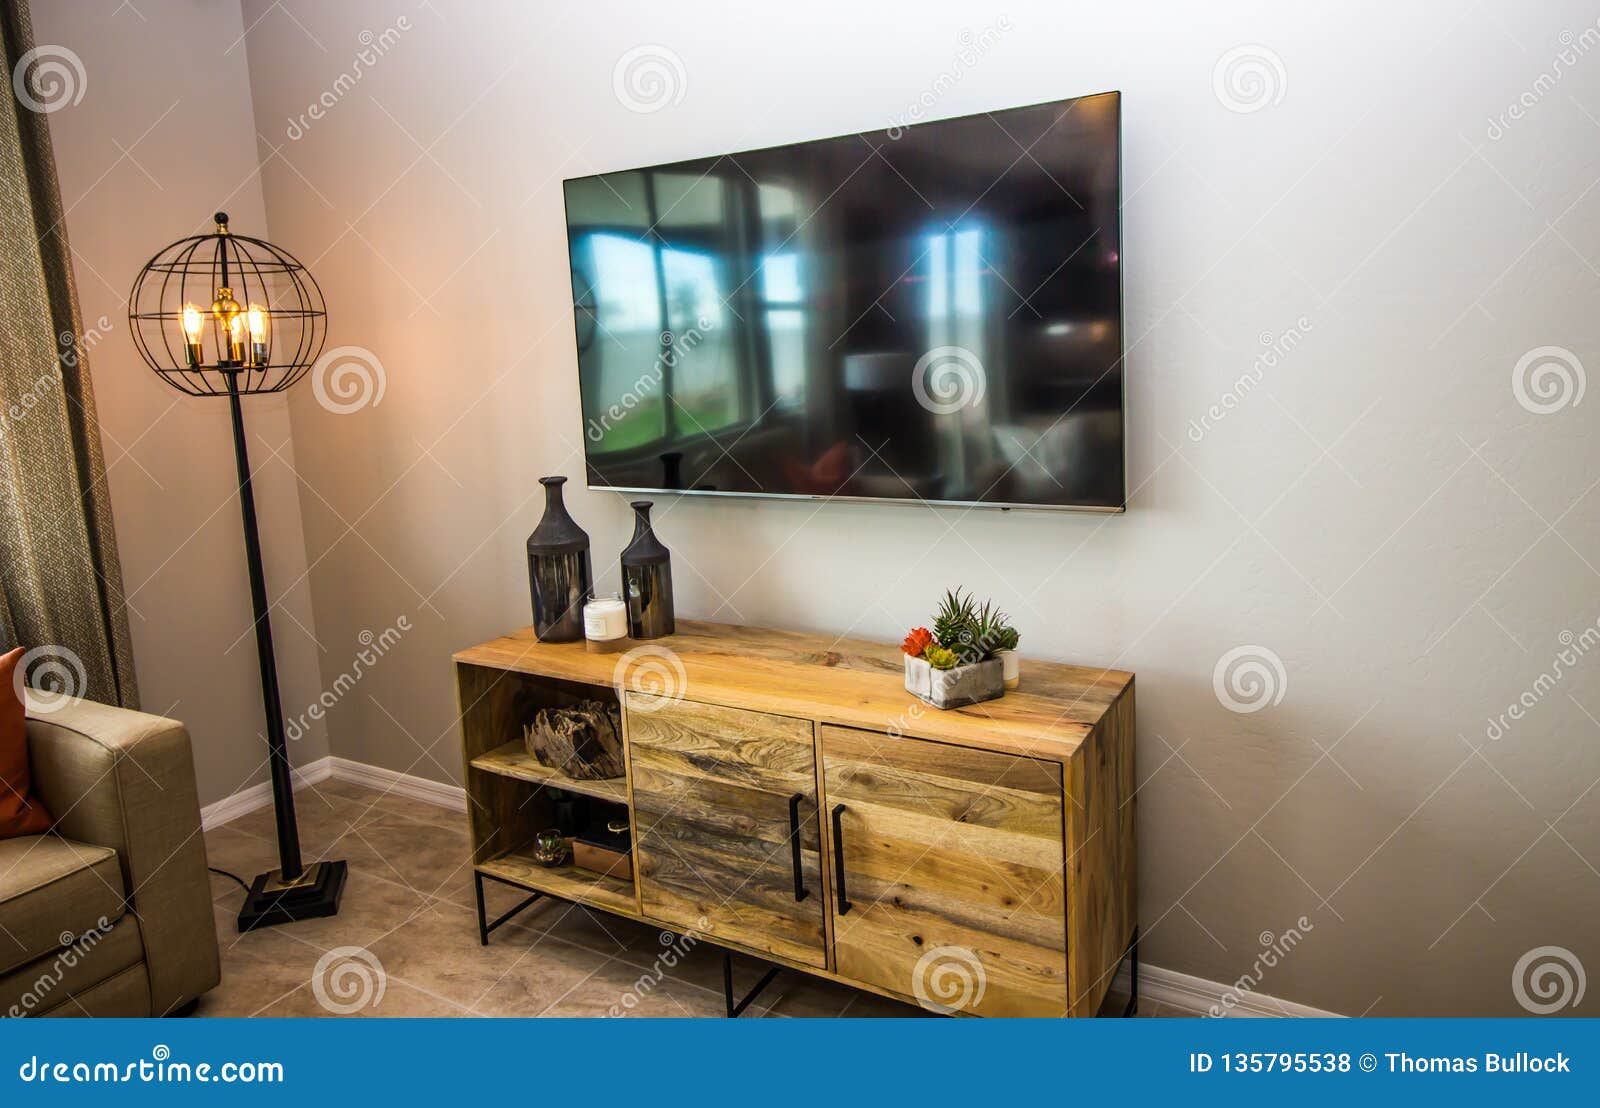 Flat Screen Tv Over Wooden Credenza Stock Photo Image Of